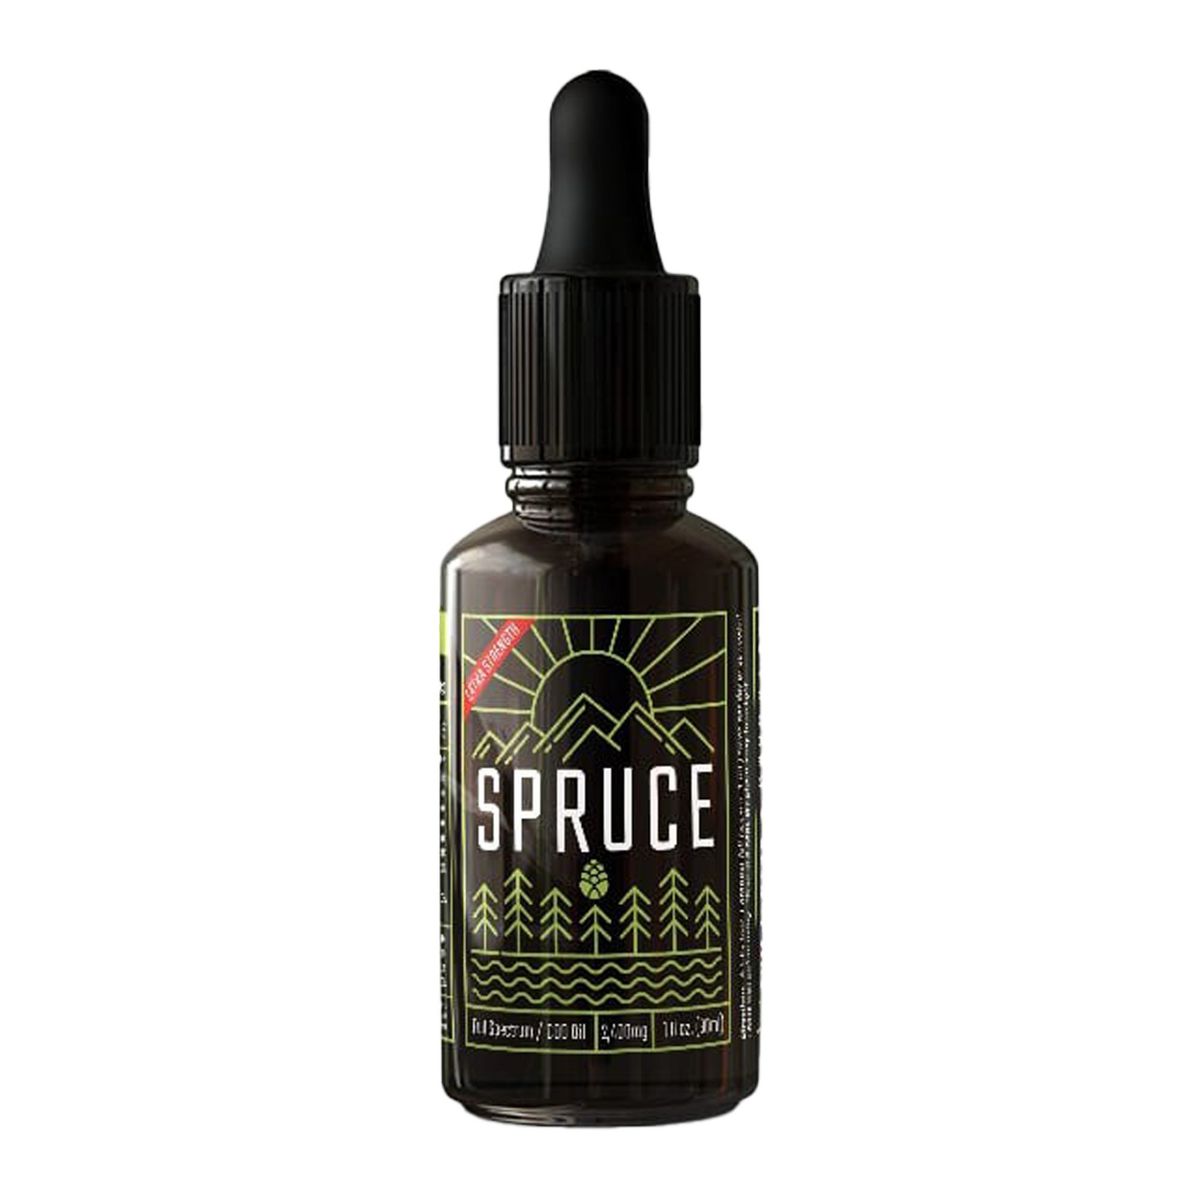 Spruce-Lab-Grande-The-10-Best-CBD-Oils-For-Pain-Relief-Products